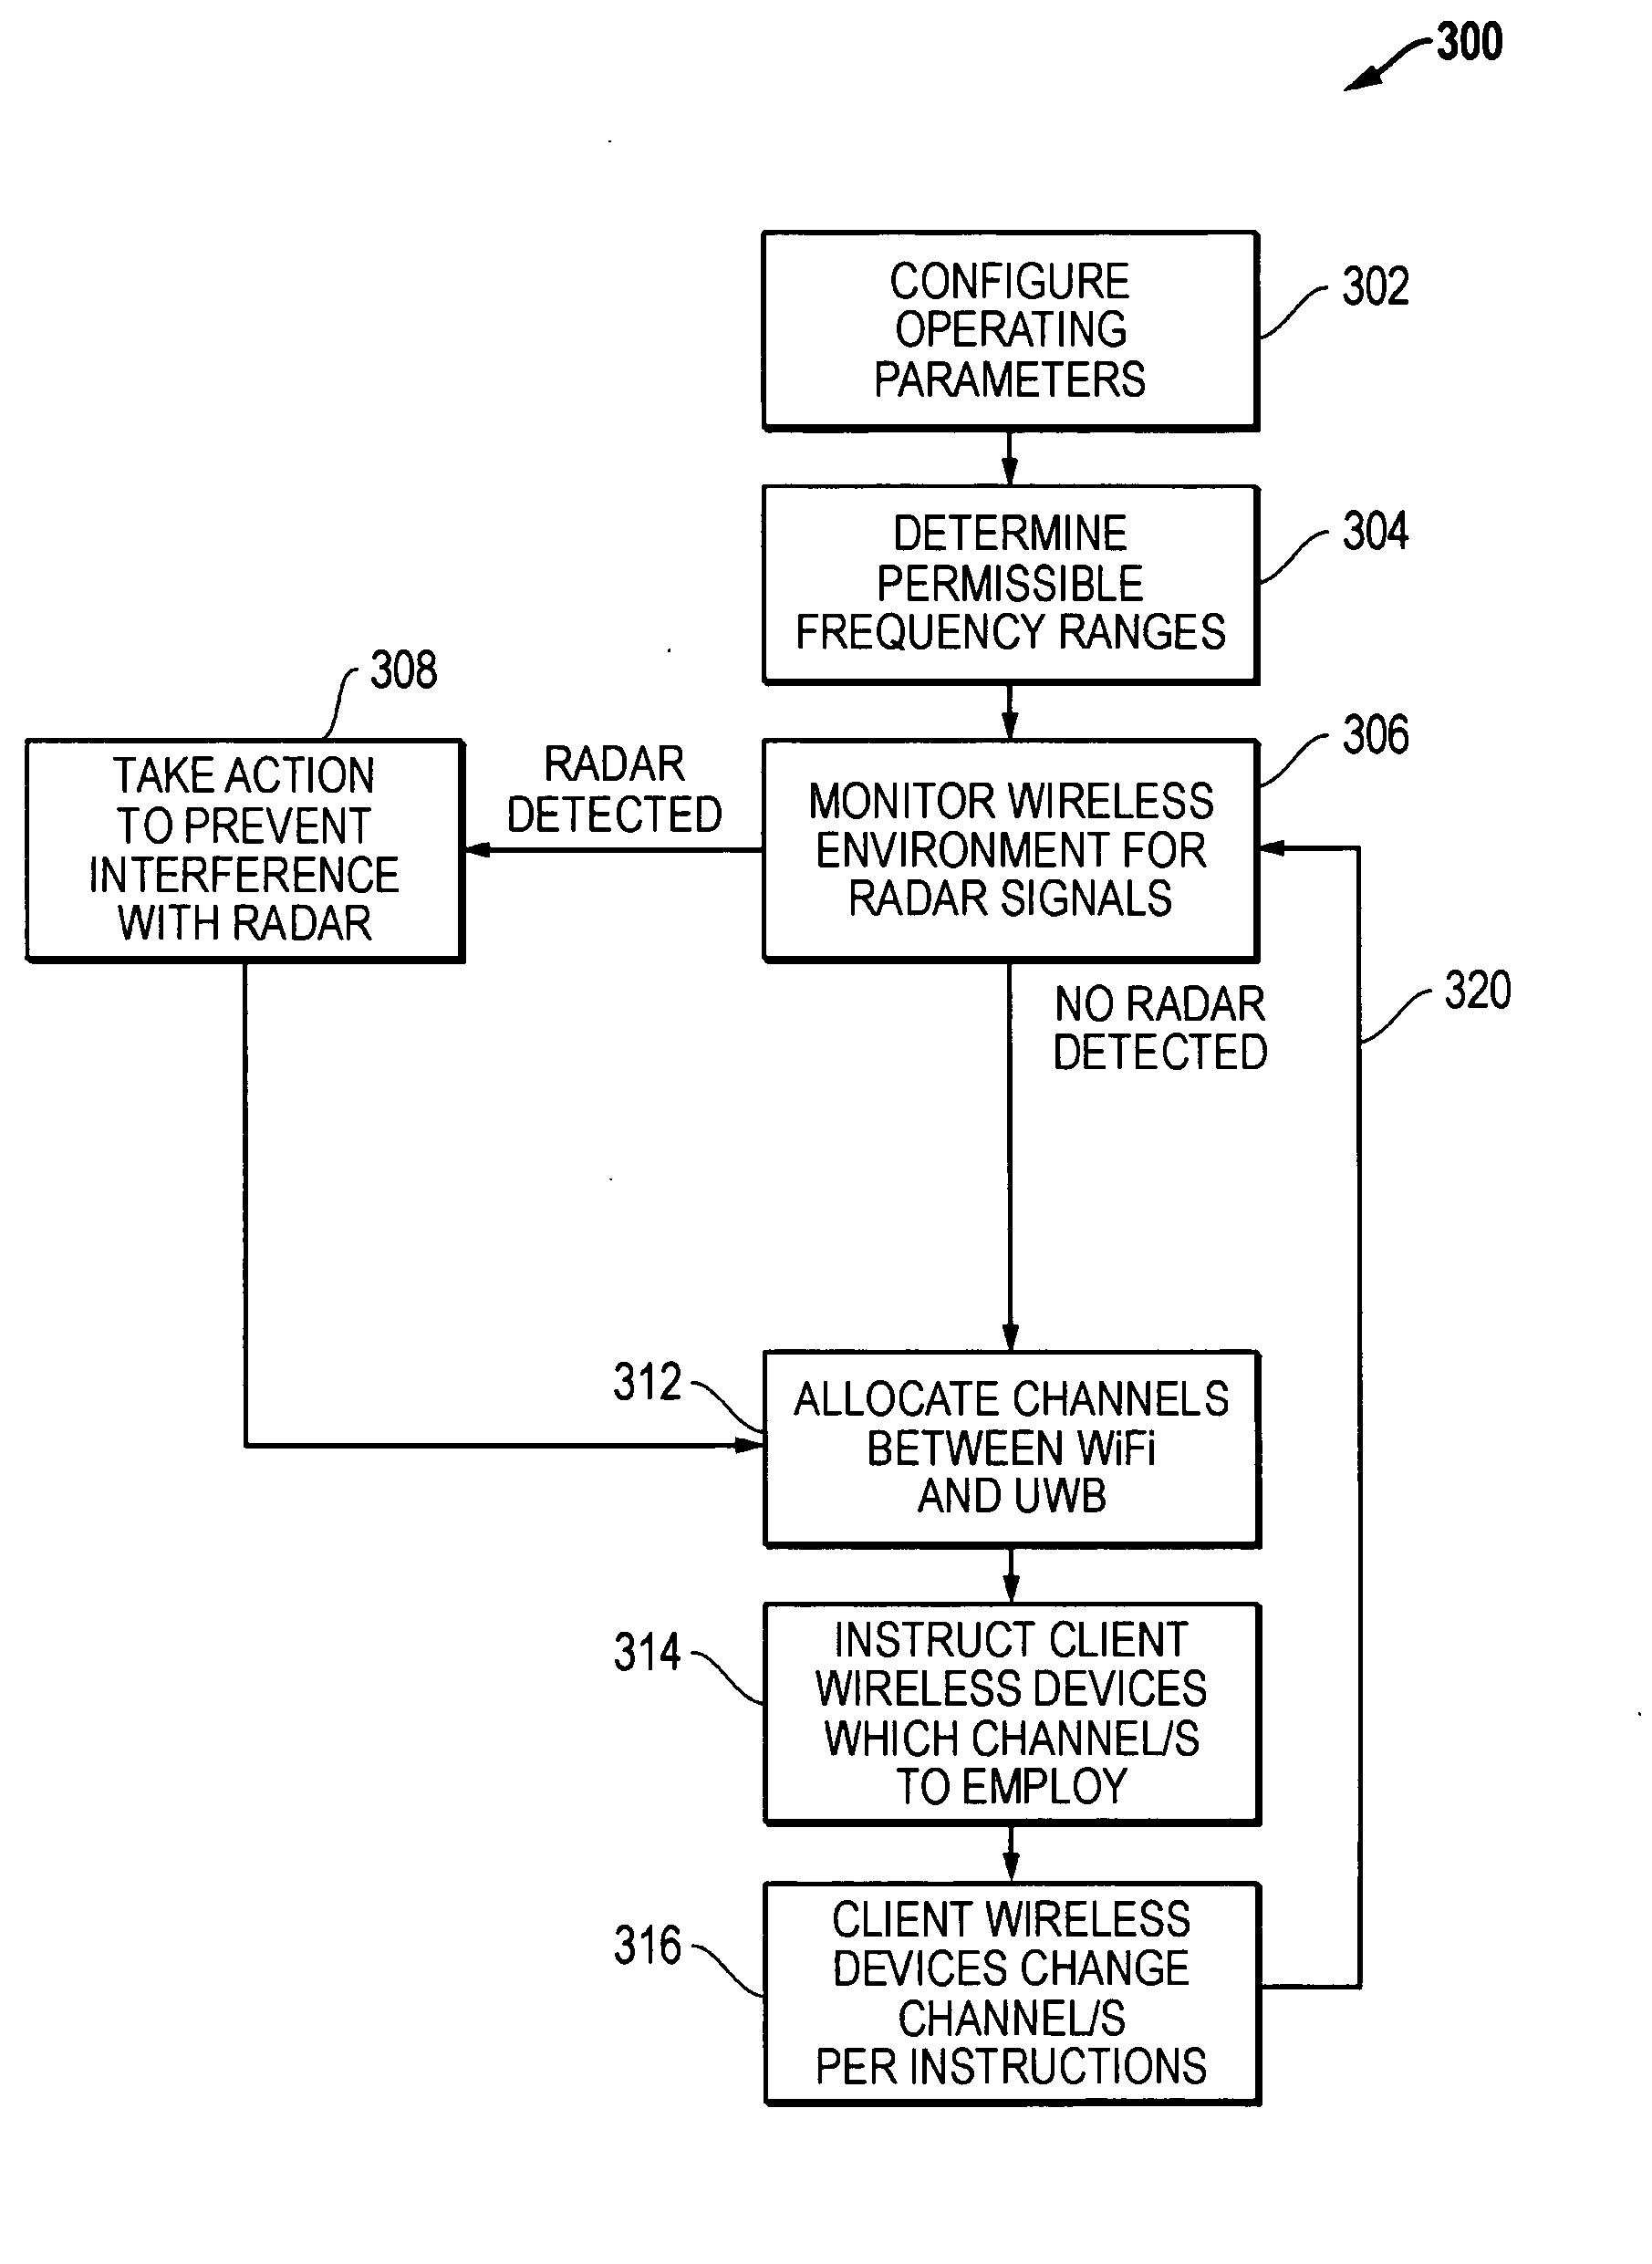 Systems and methods for RF spectrum management